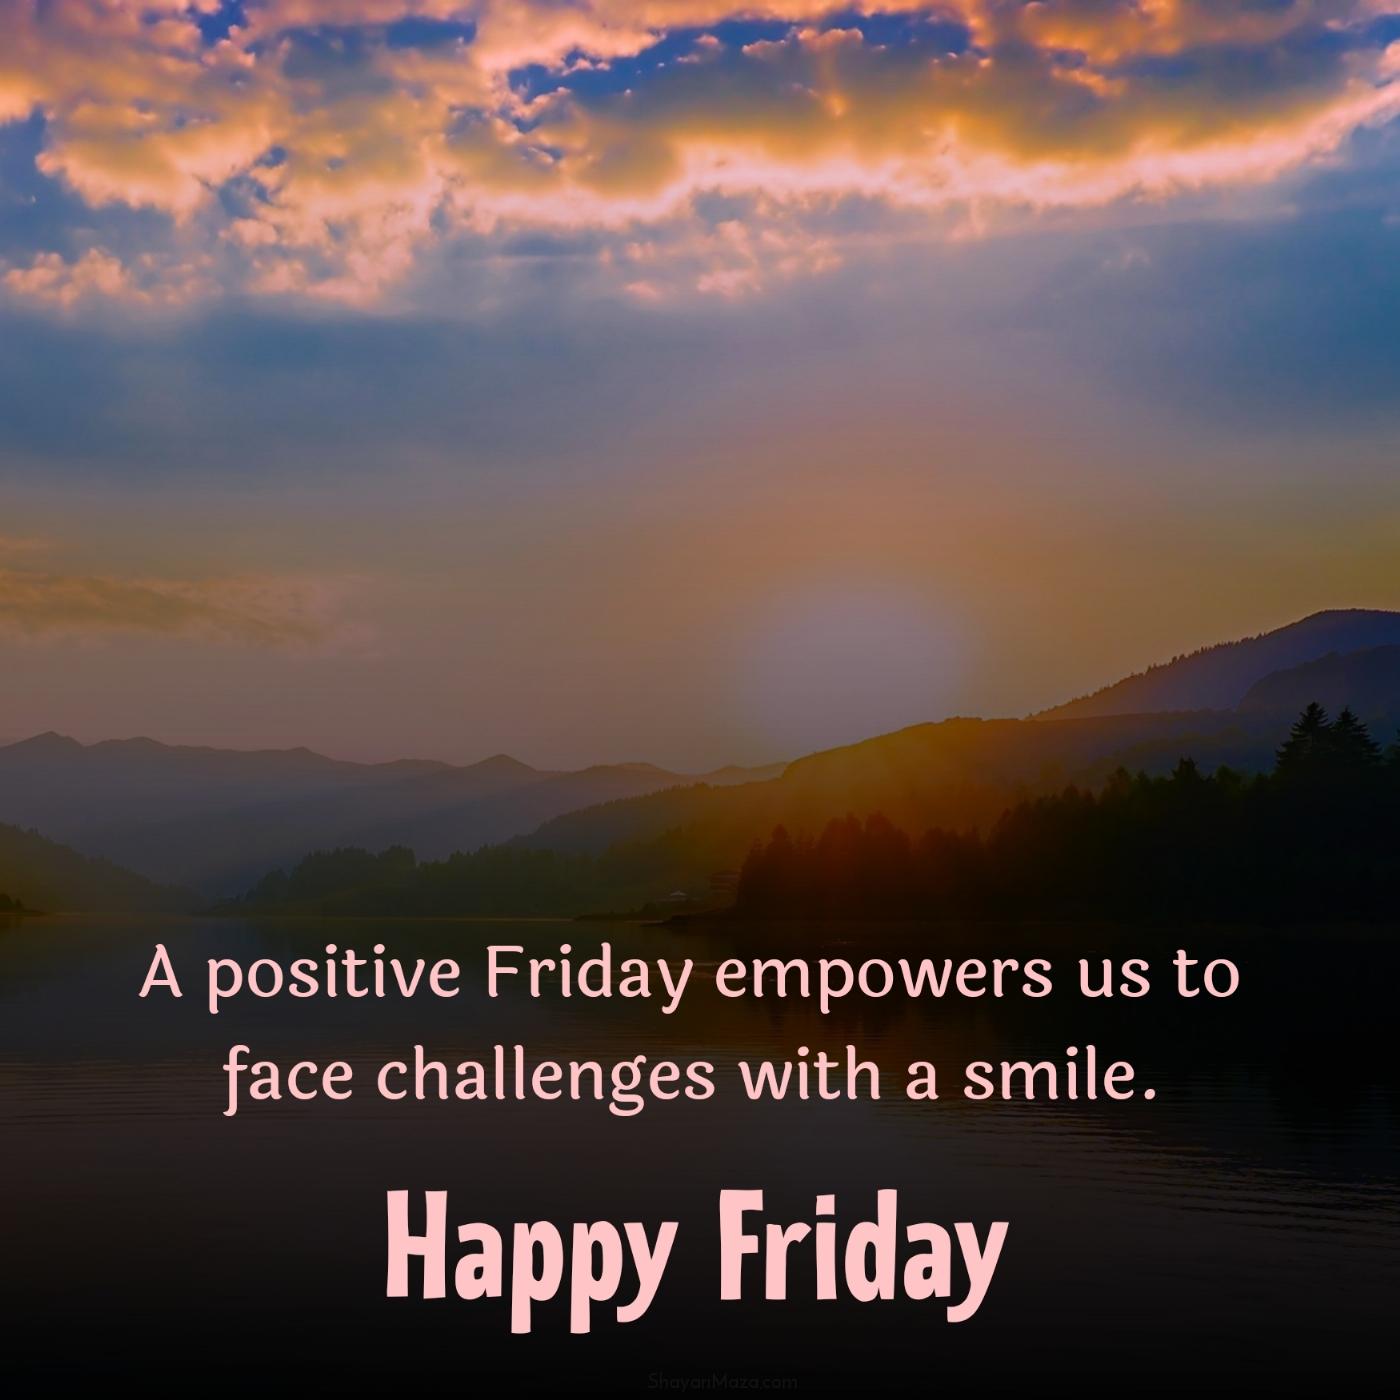 A positive Friday empowers us to face challenges with a smile